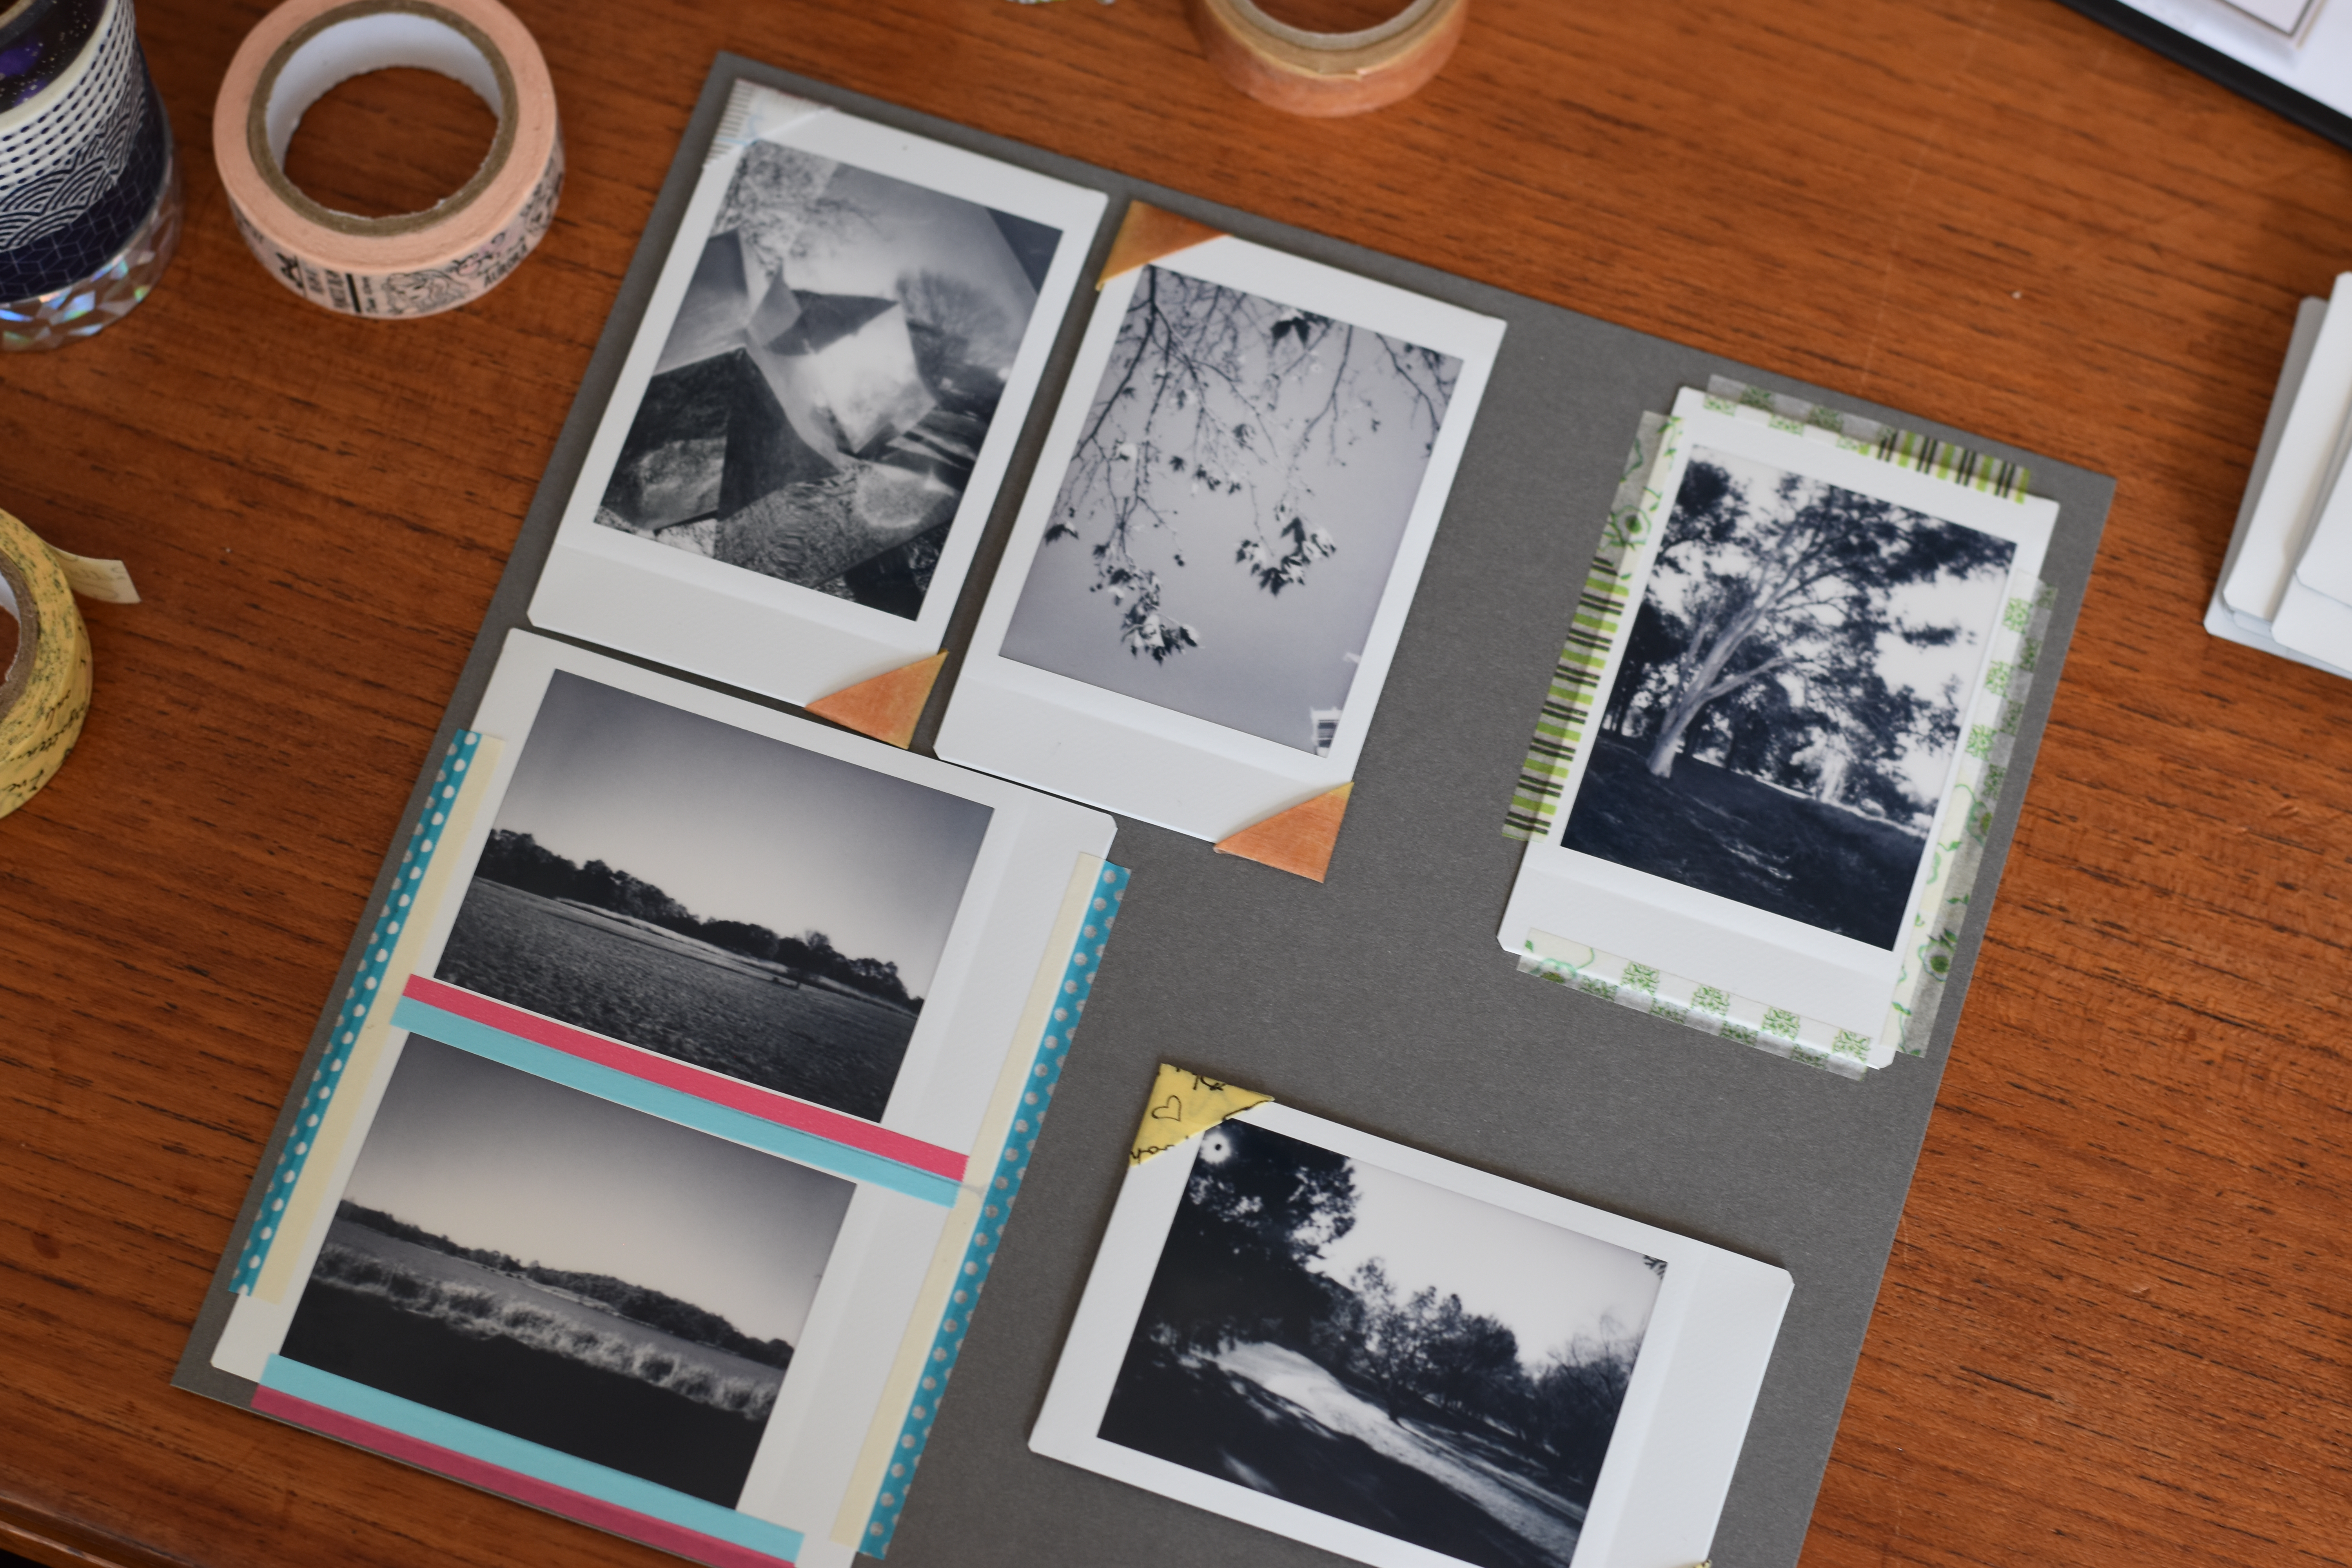 A page from a scrapbook with 6 Instax mini photos. From top left, a print has photo corners on two corners, a print has photo corners on two corners, a print is held down by tape on four sides, a print has photo corners on two corners, two prints are taped by tape on three sides